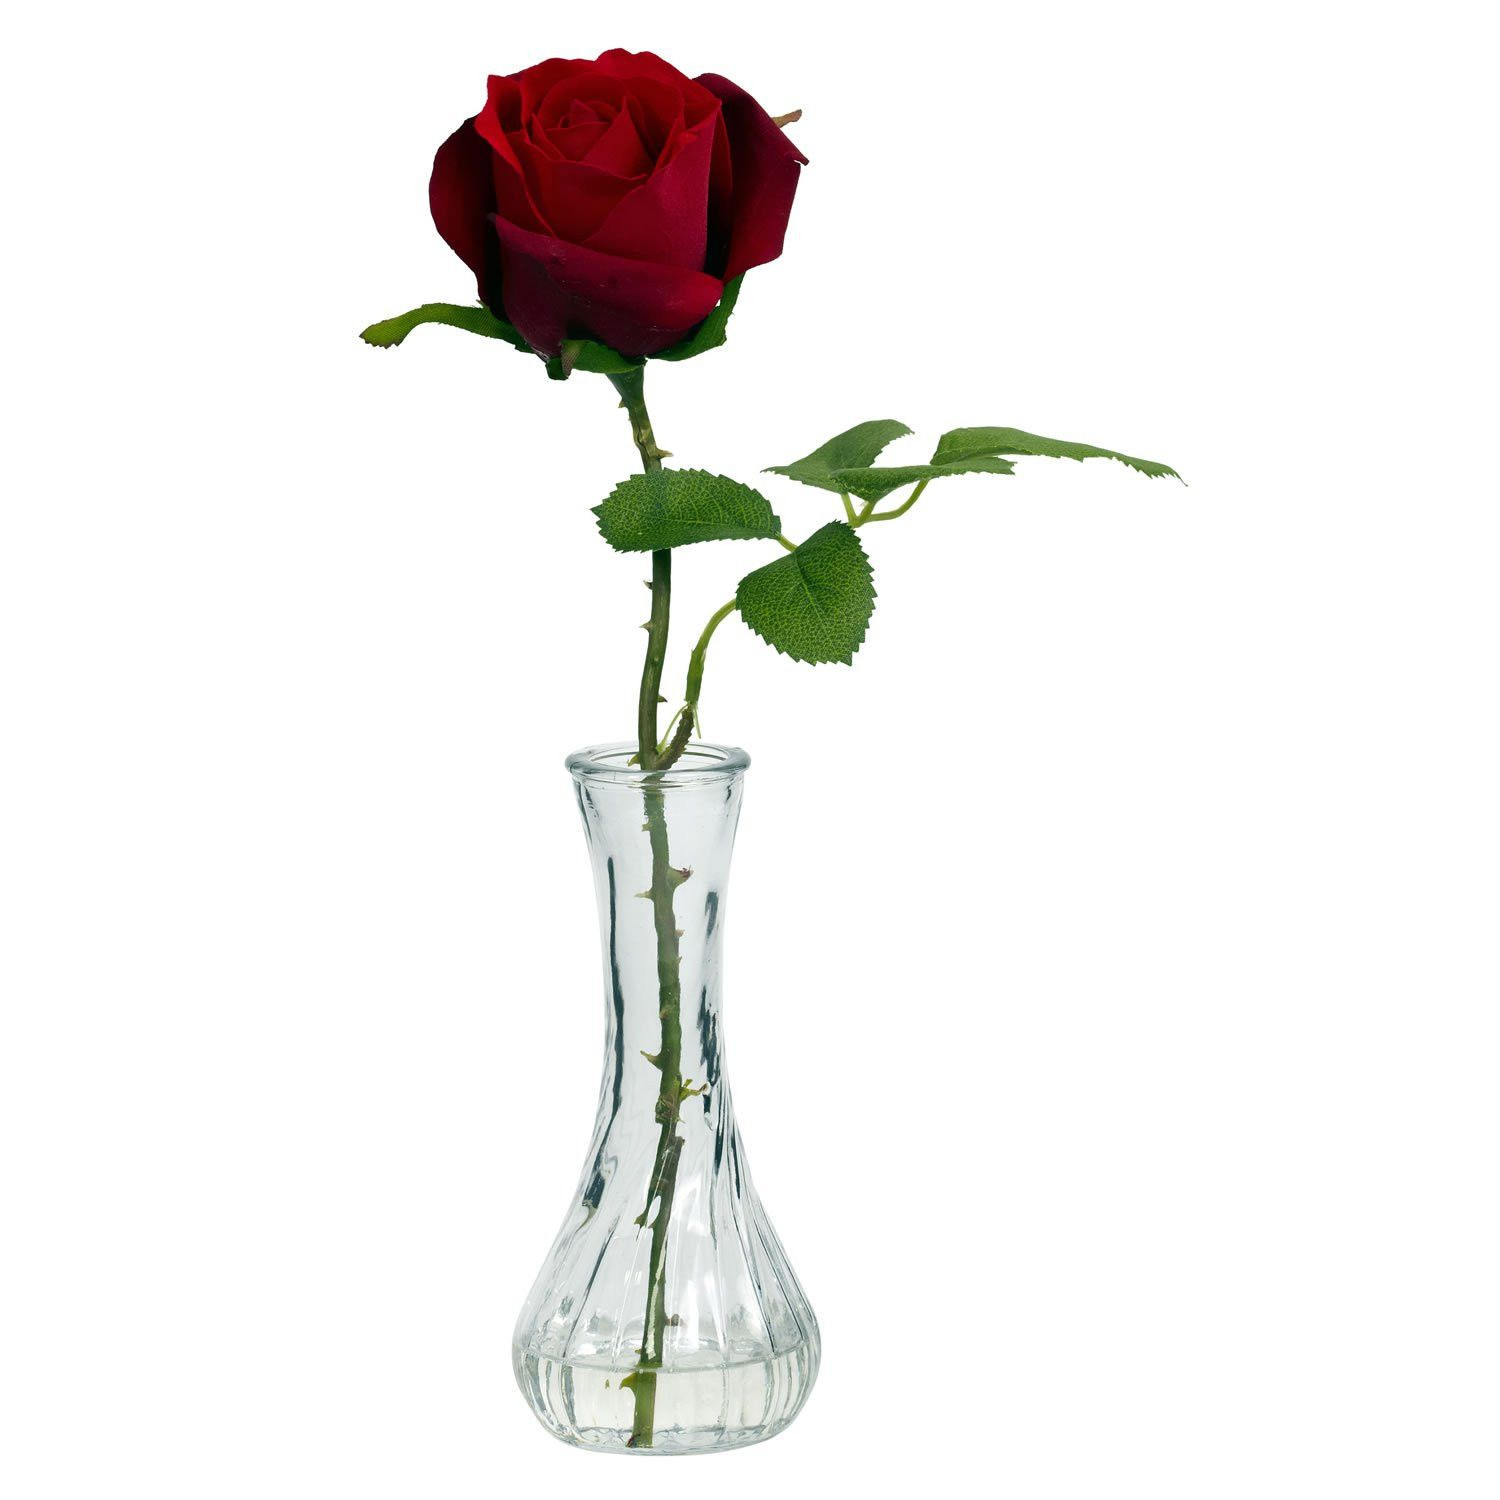 25 attractive Cheap Red Vases 2024 free download cheap red vases of pictures of roses in a vase inspirational vase redh vases single in pictures of roses in a vase inspirational vase redh vases single rose in vasei 0d a